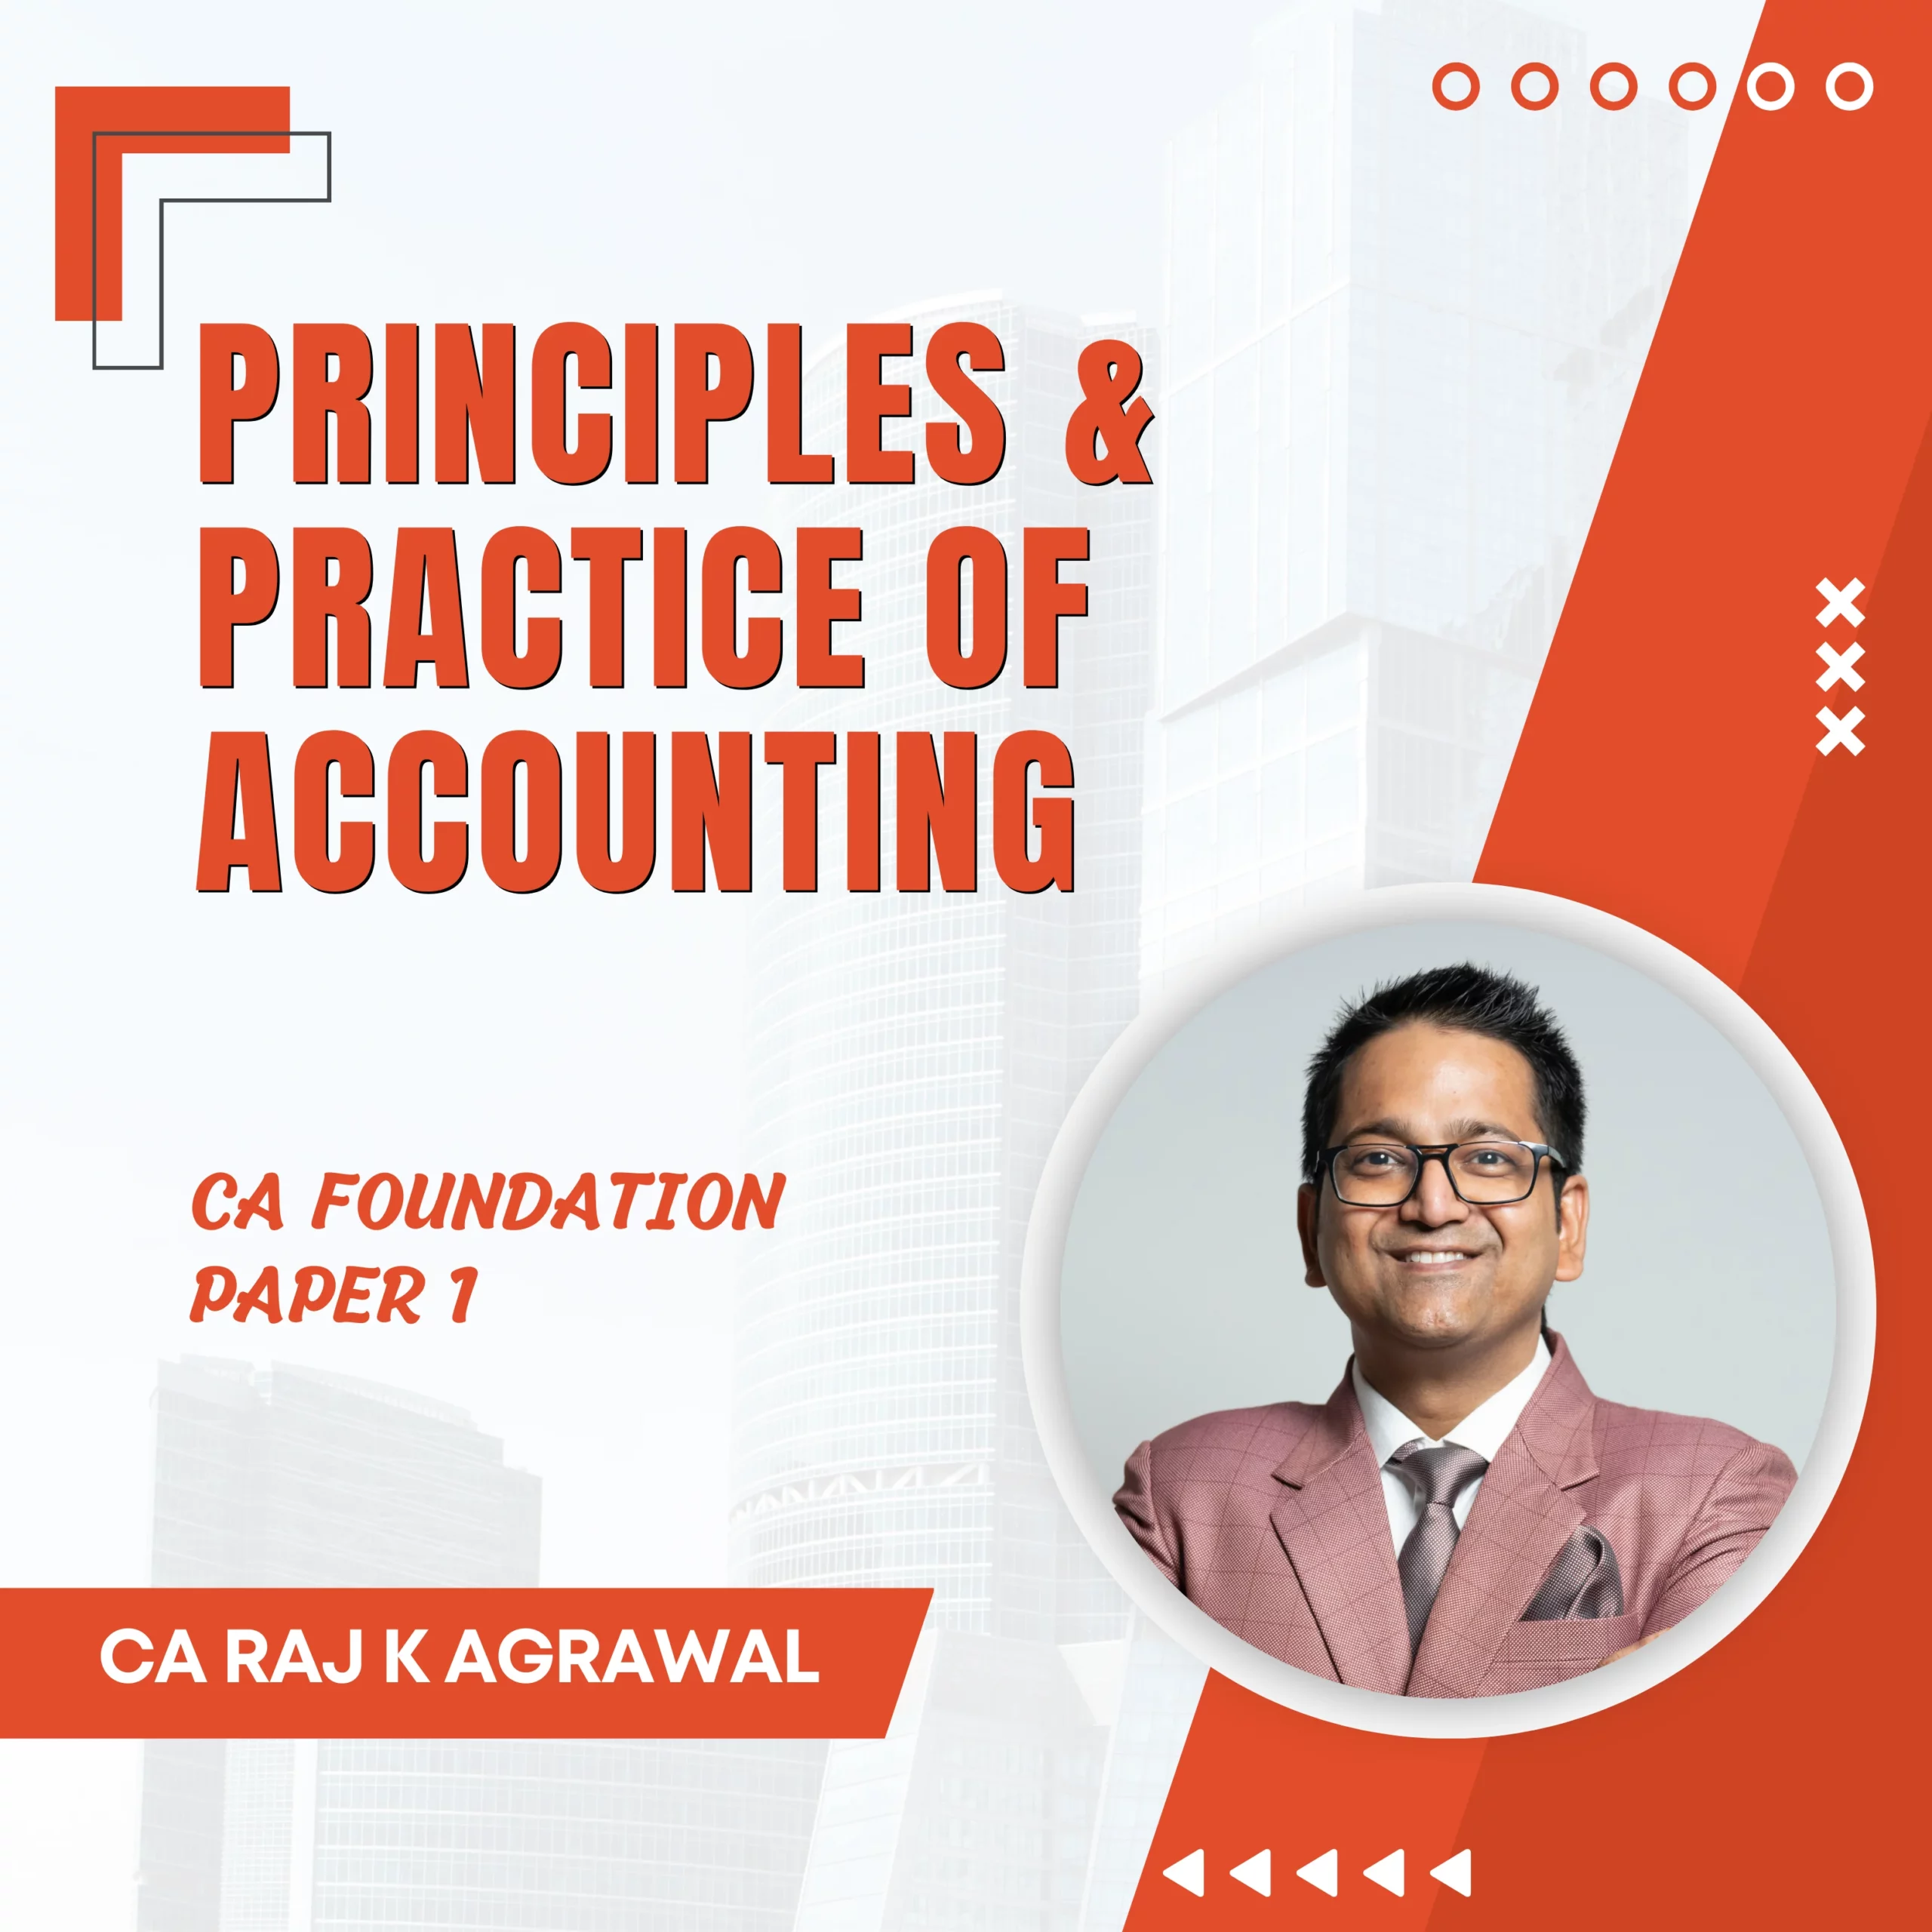 Principles & Practice of Accounting (CA Foundation) - Paper 1